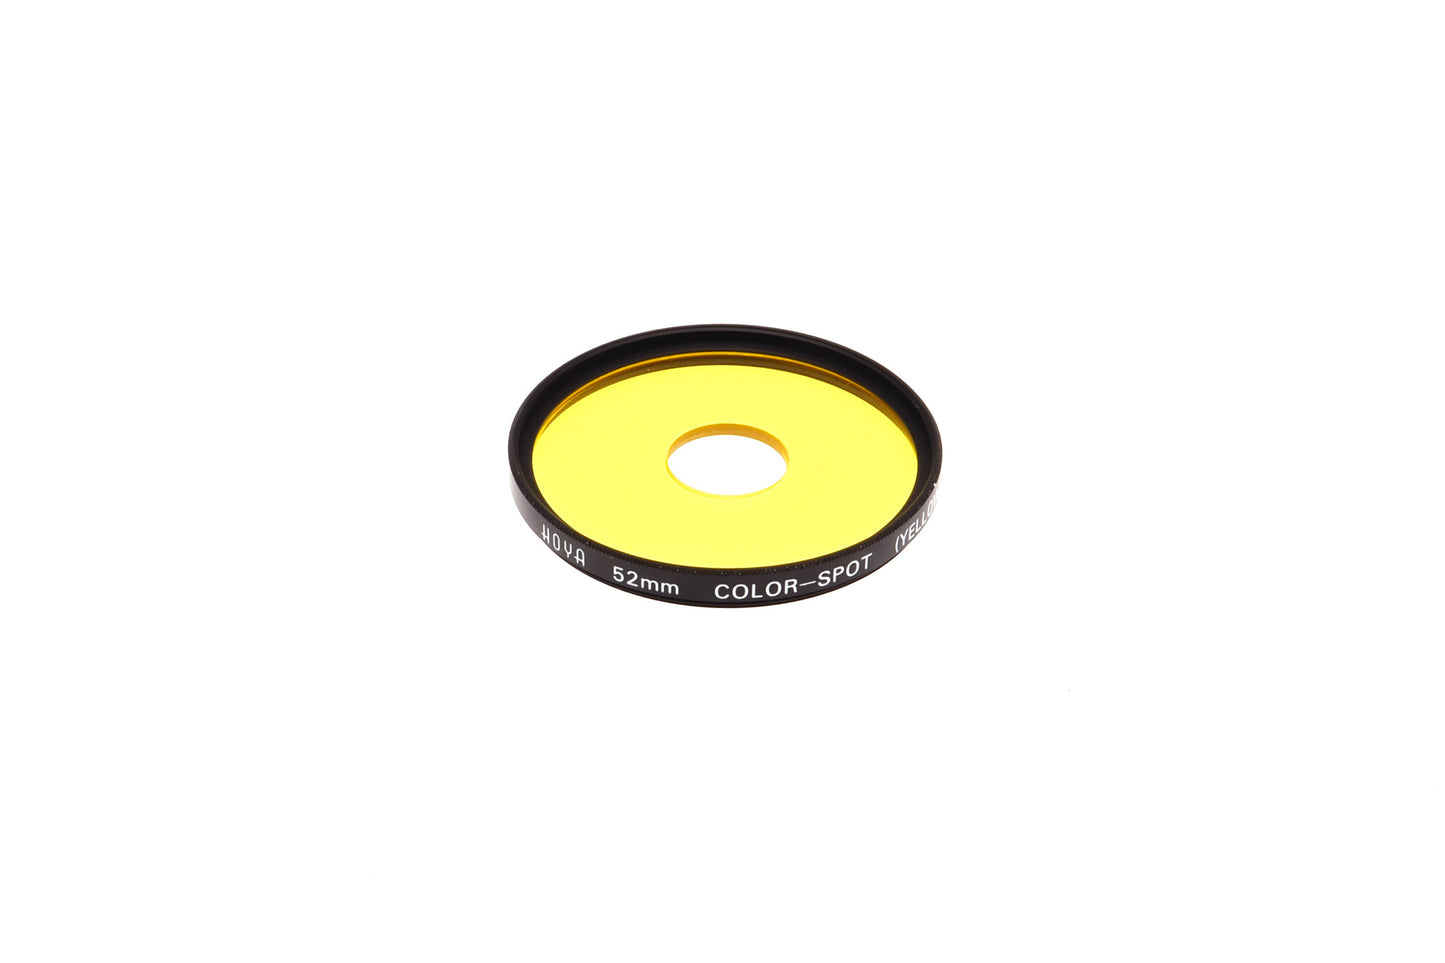 Hoya 52mm Color-Spot Filter (Yellow) - Accessory